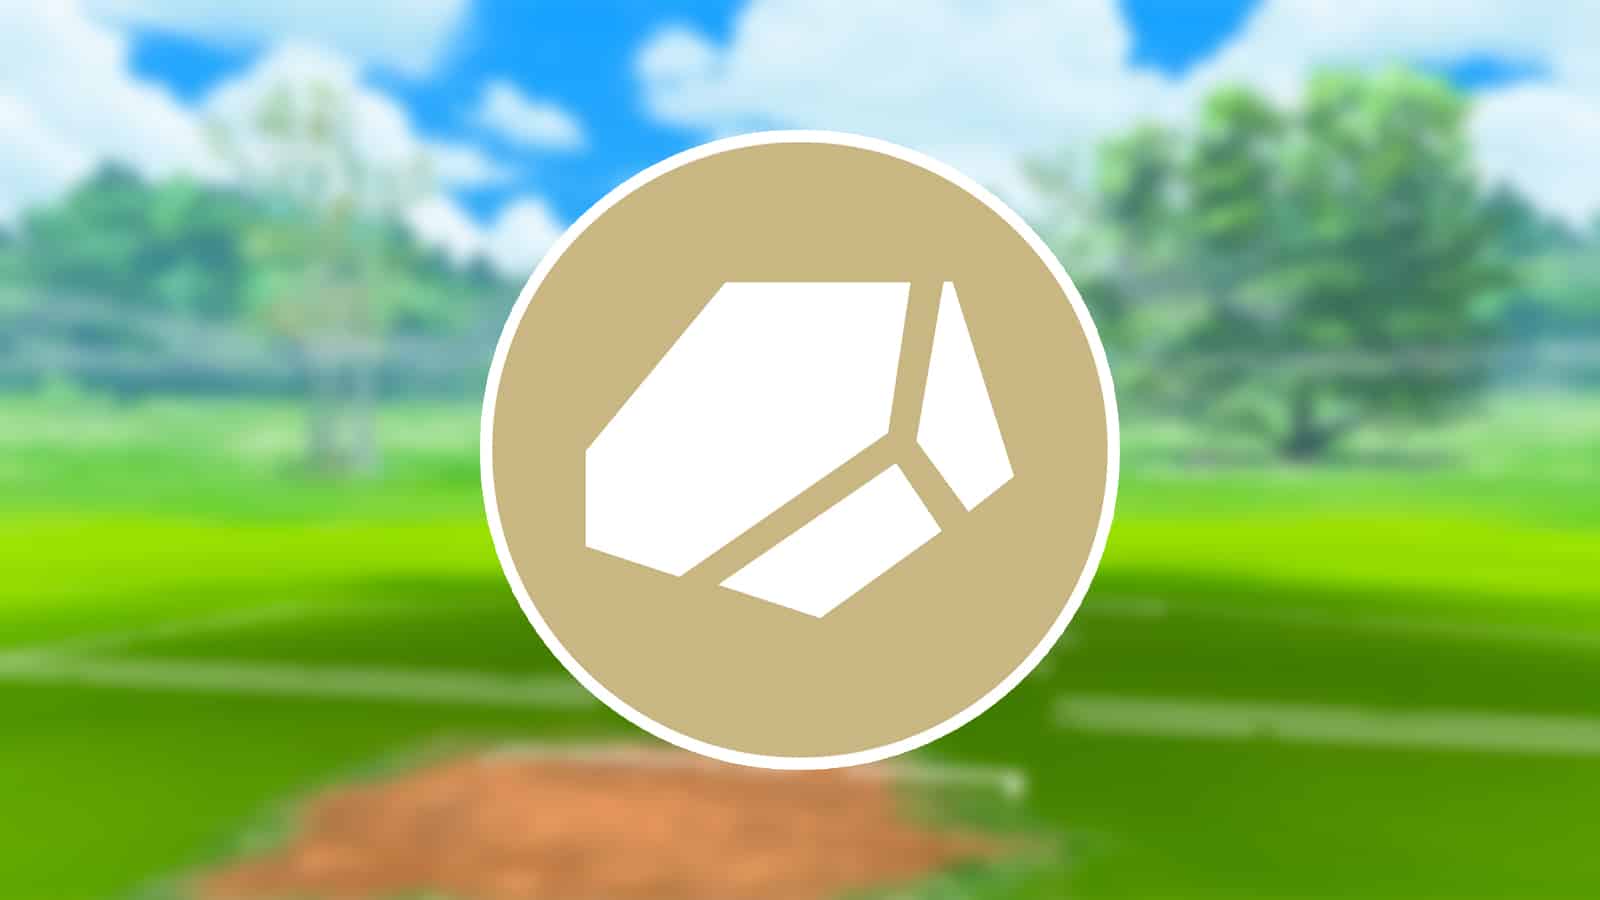 The Ancient Power move symbol for Mamoswine in Pokemon Go